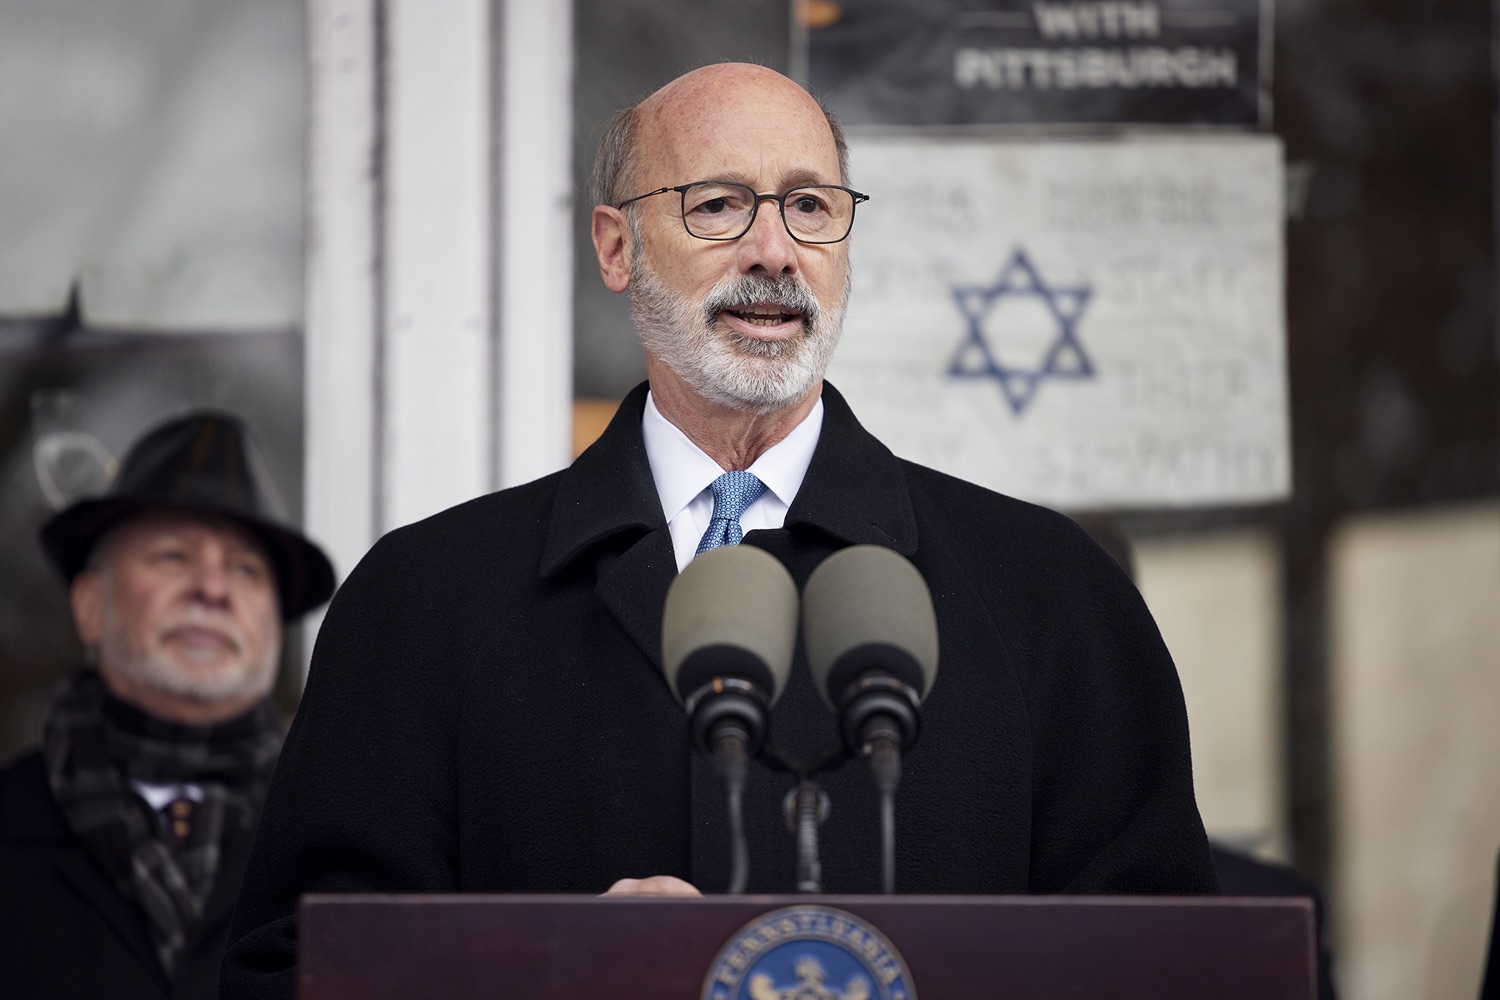 Pennsylvania Governor Tom Wolf speaking with the press.  Governor Tom Wolf visited the Tree of Life in Pittsburgh today to announce $6.6 million in state funding to support the rebuilding and reimagining of the synagogue. The governor was joined by Rabbi Jeffrey Myers, Senate Democratic Leader Jay Costa and members of the Tree of Lifes REMEMBER. REBUILD. RENEW campaign which will transform the site of the worst antisemitic attack in U.S. history into a new place of hope, remembrance, and education. Pittsburgh, PA - December 6, 2021<br><a href="https://filesource.amperwave.net/commonwealthofpa/photo/20308_gov_treeOfLife_dz_007_copy.jpg" target="_blank">⇣ Download Photo</a>